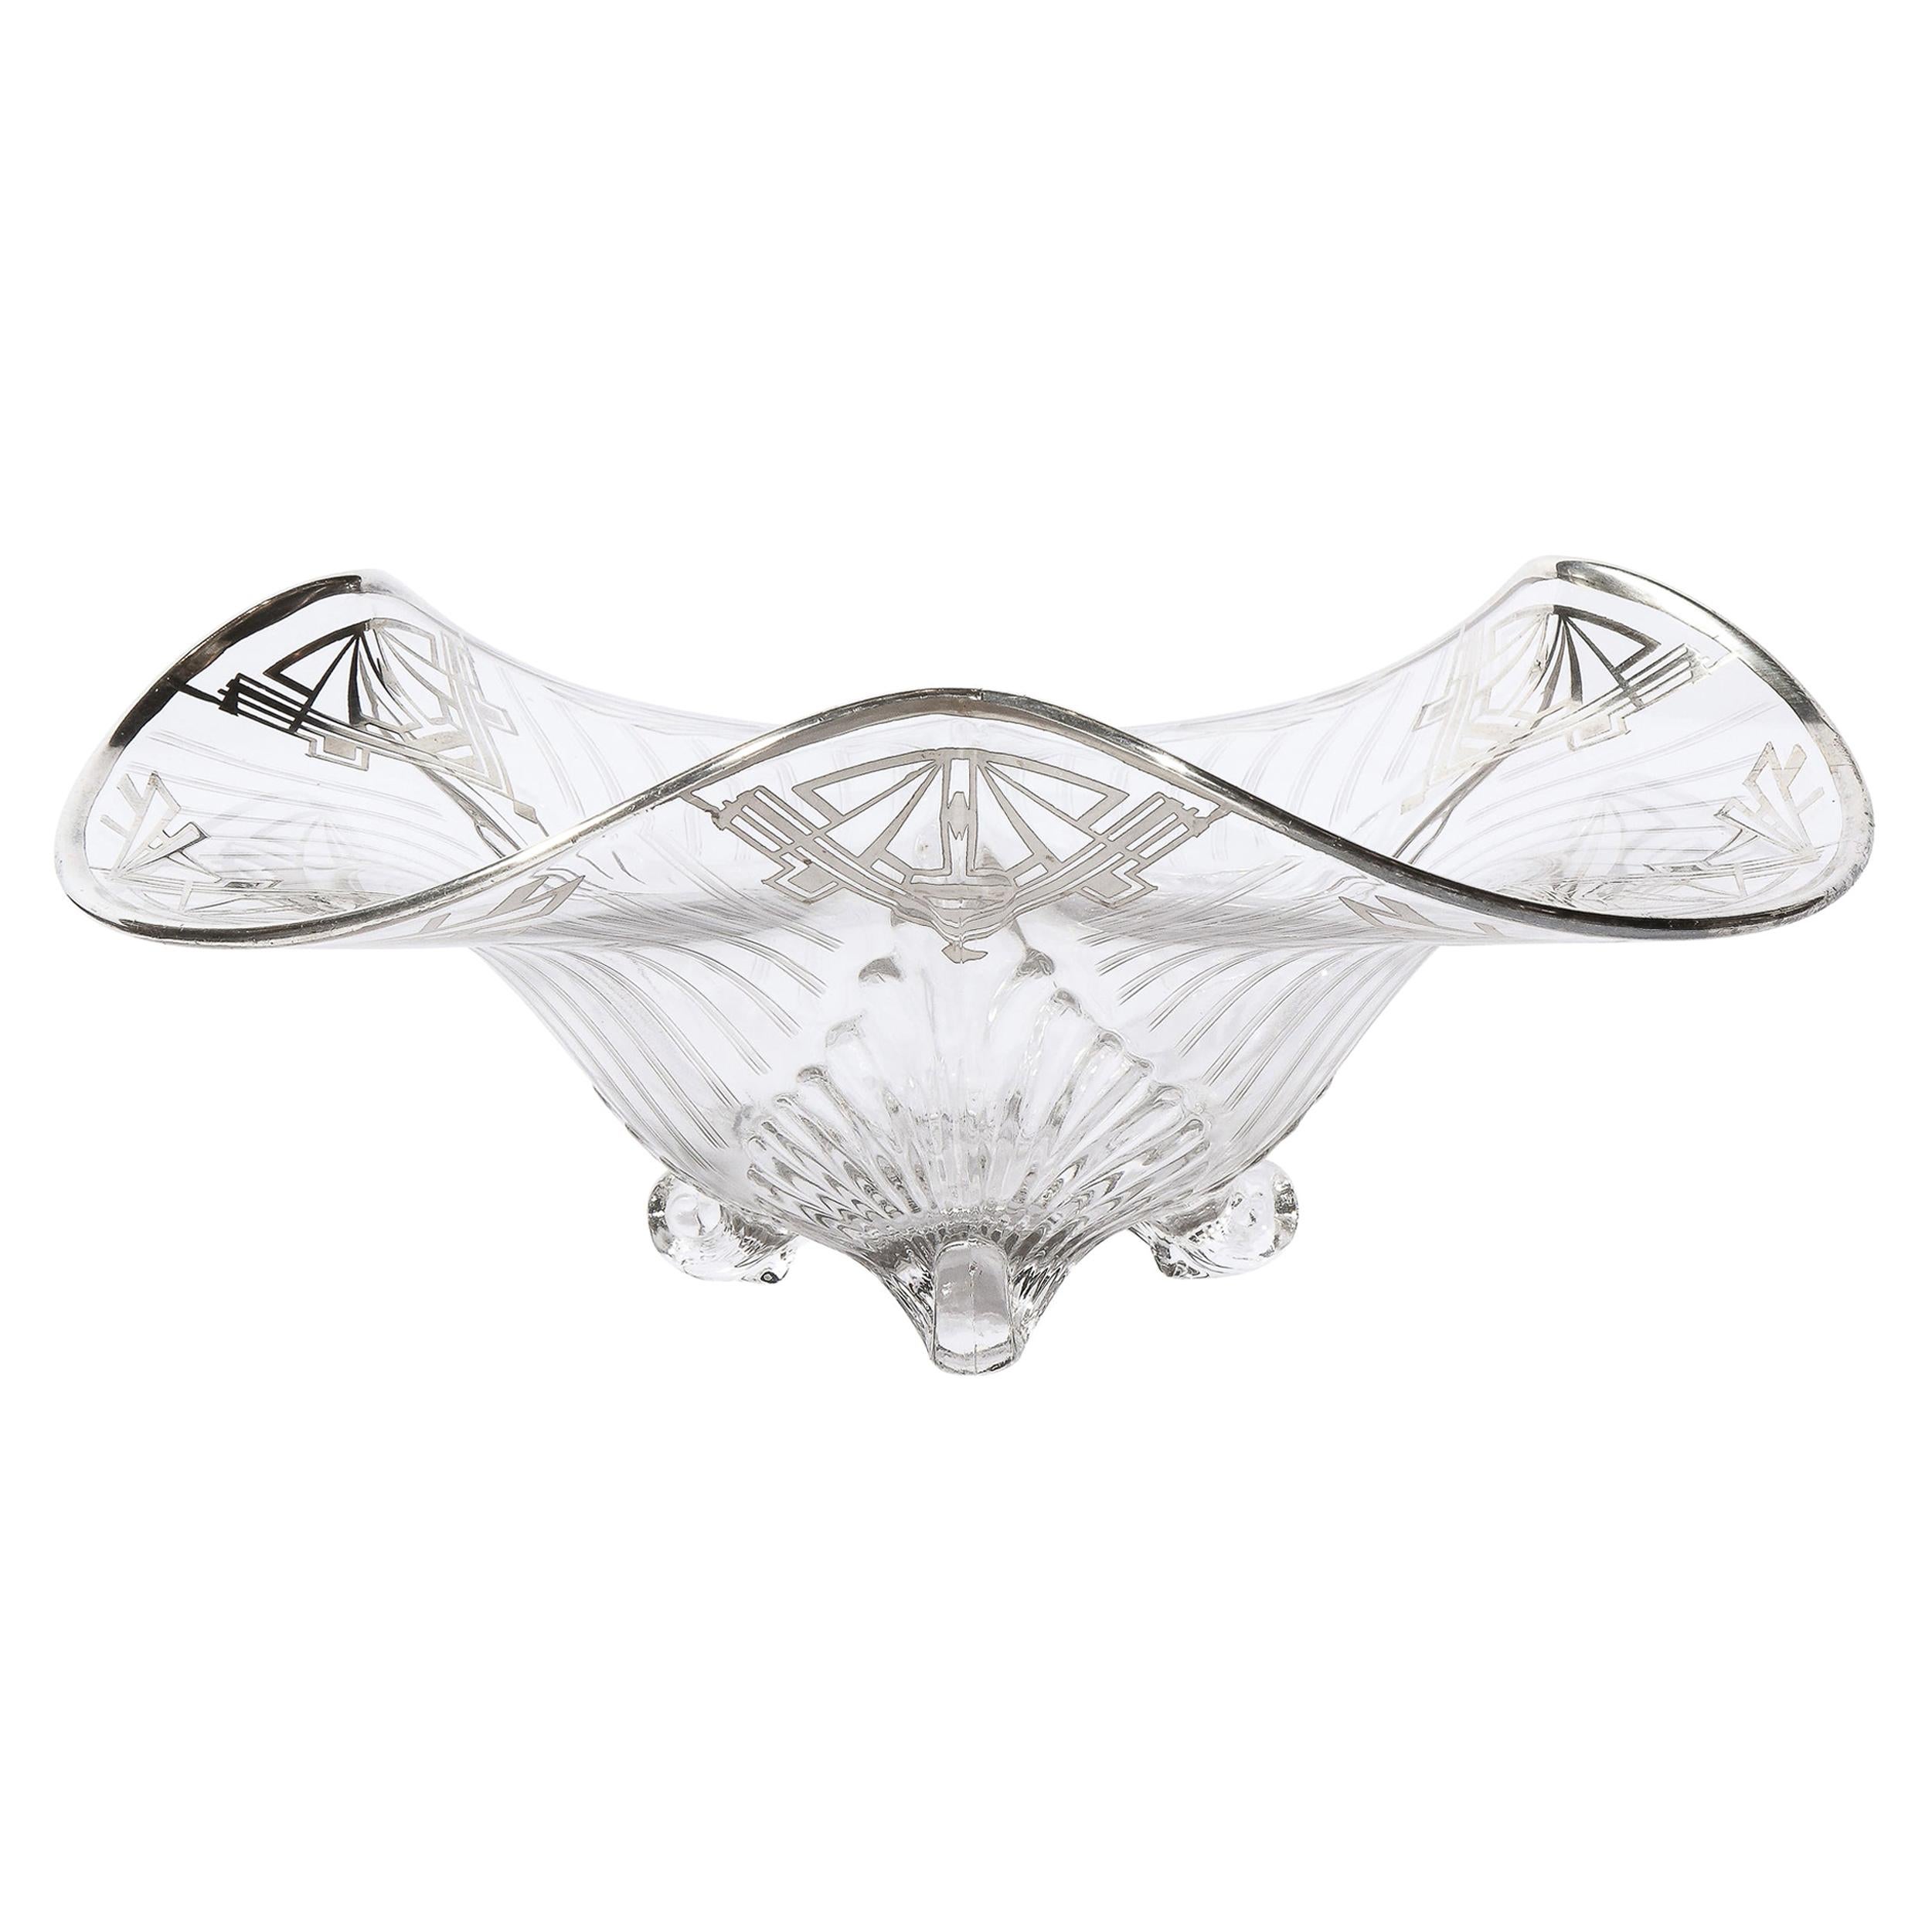 Art Deco Machine Age Translucent Glass Center Bowl with Sterling Silver Overlay For Sale